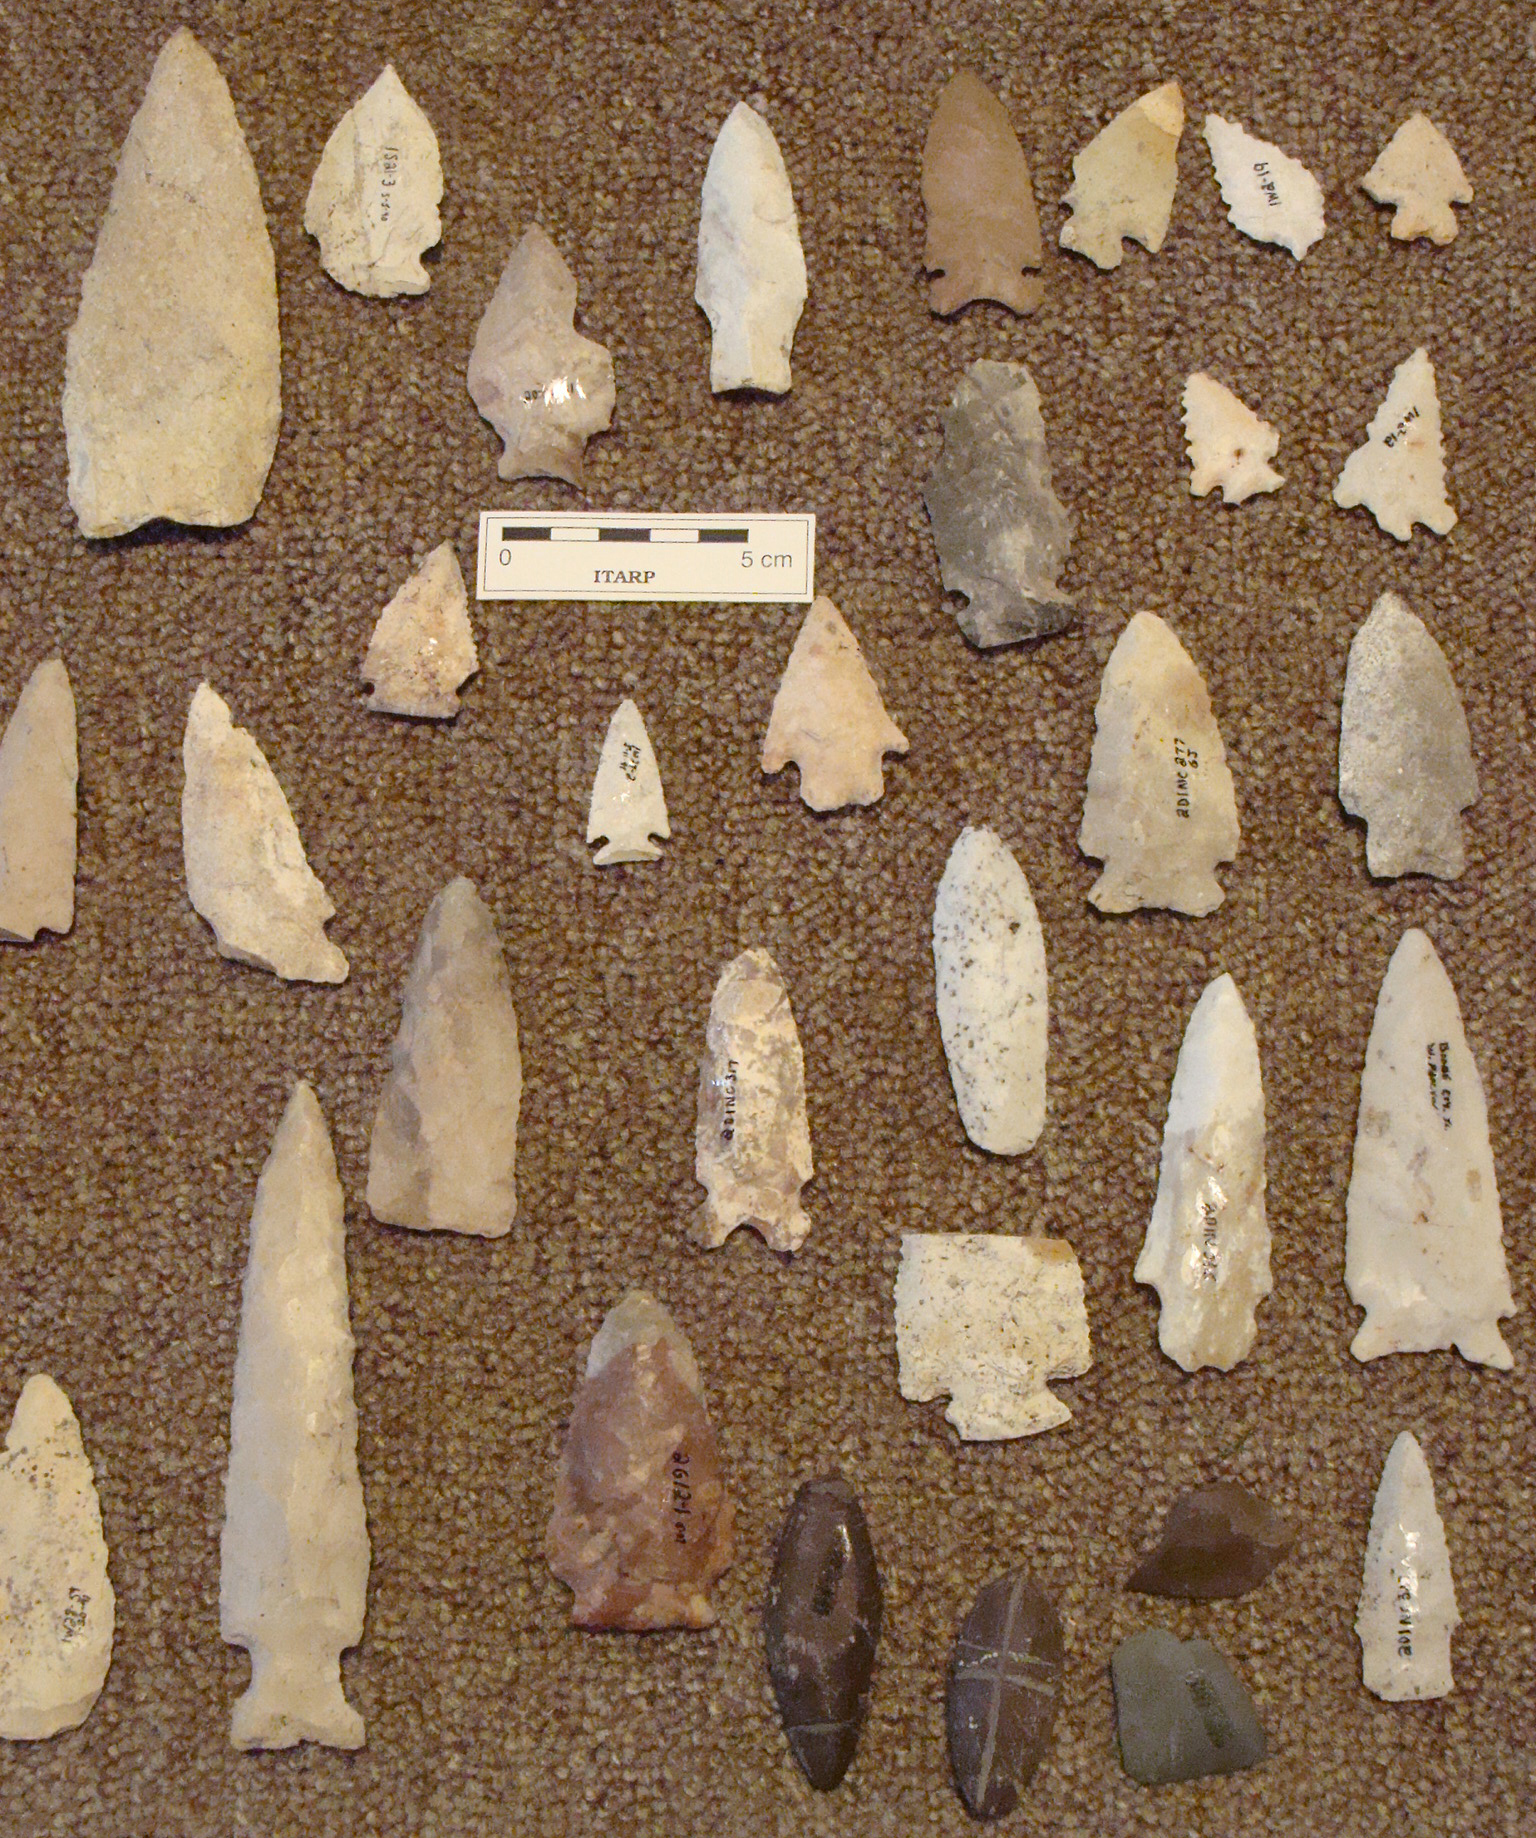 Early Mid-Archaic Projectile points